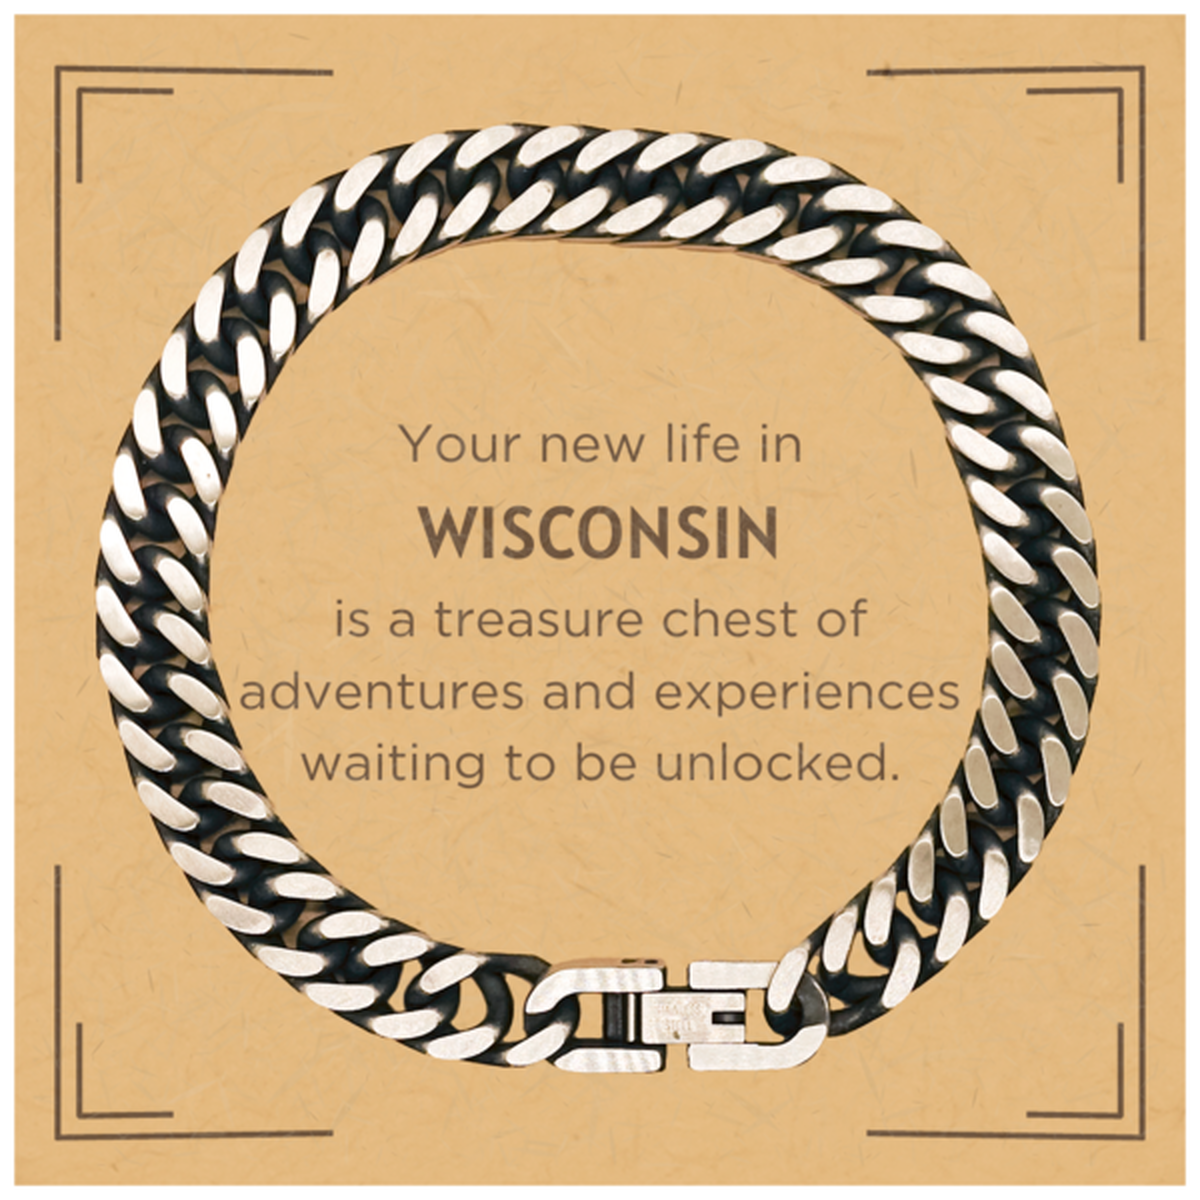 Moving to Wisconsin Gifts, Your new life in Wisconsin, Long Distance Wisconsin Christmas Cuban Link Chain Bracelet For Men, Women, Friends, Coworkers